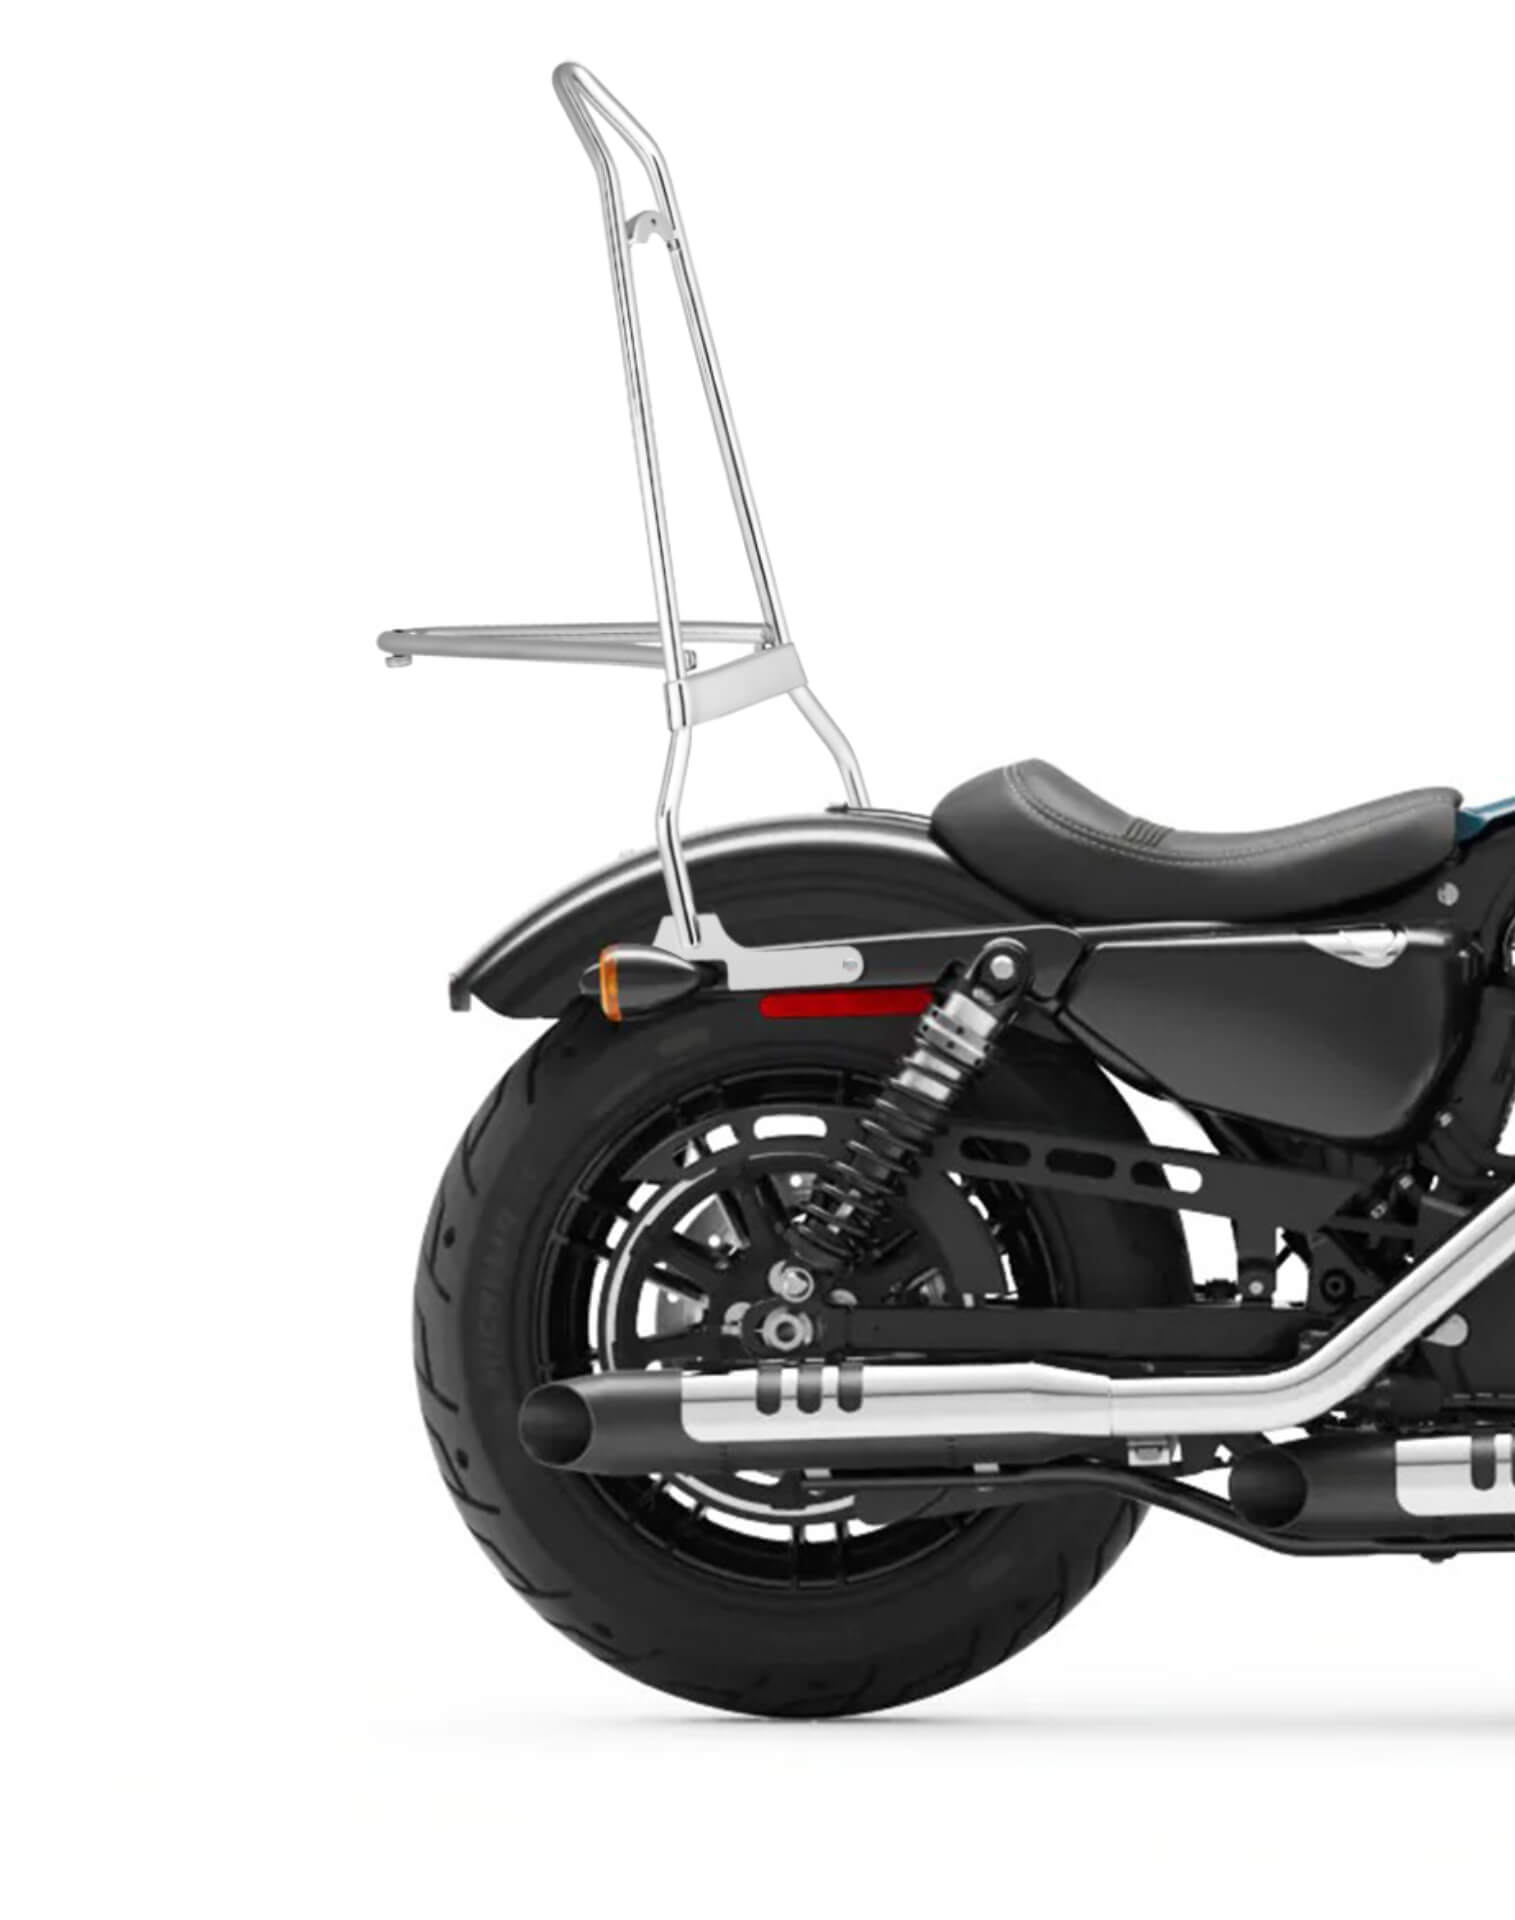 Iron Born Blade 25" Sissy Bar with Foldable Luggage Rack for Harley Sportster Forty Eight Chrome Close Up View